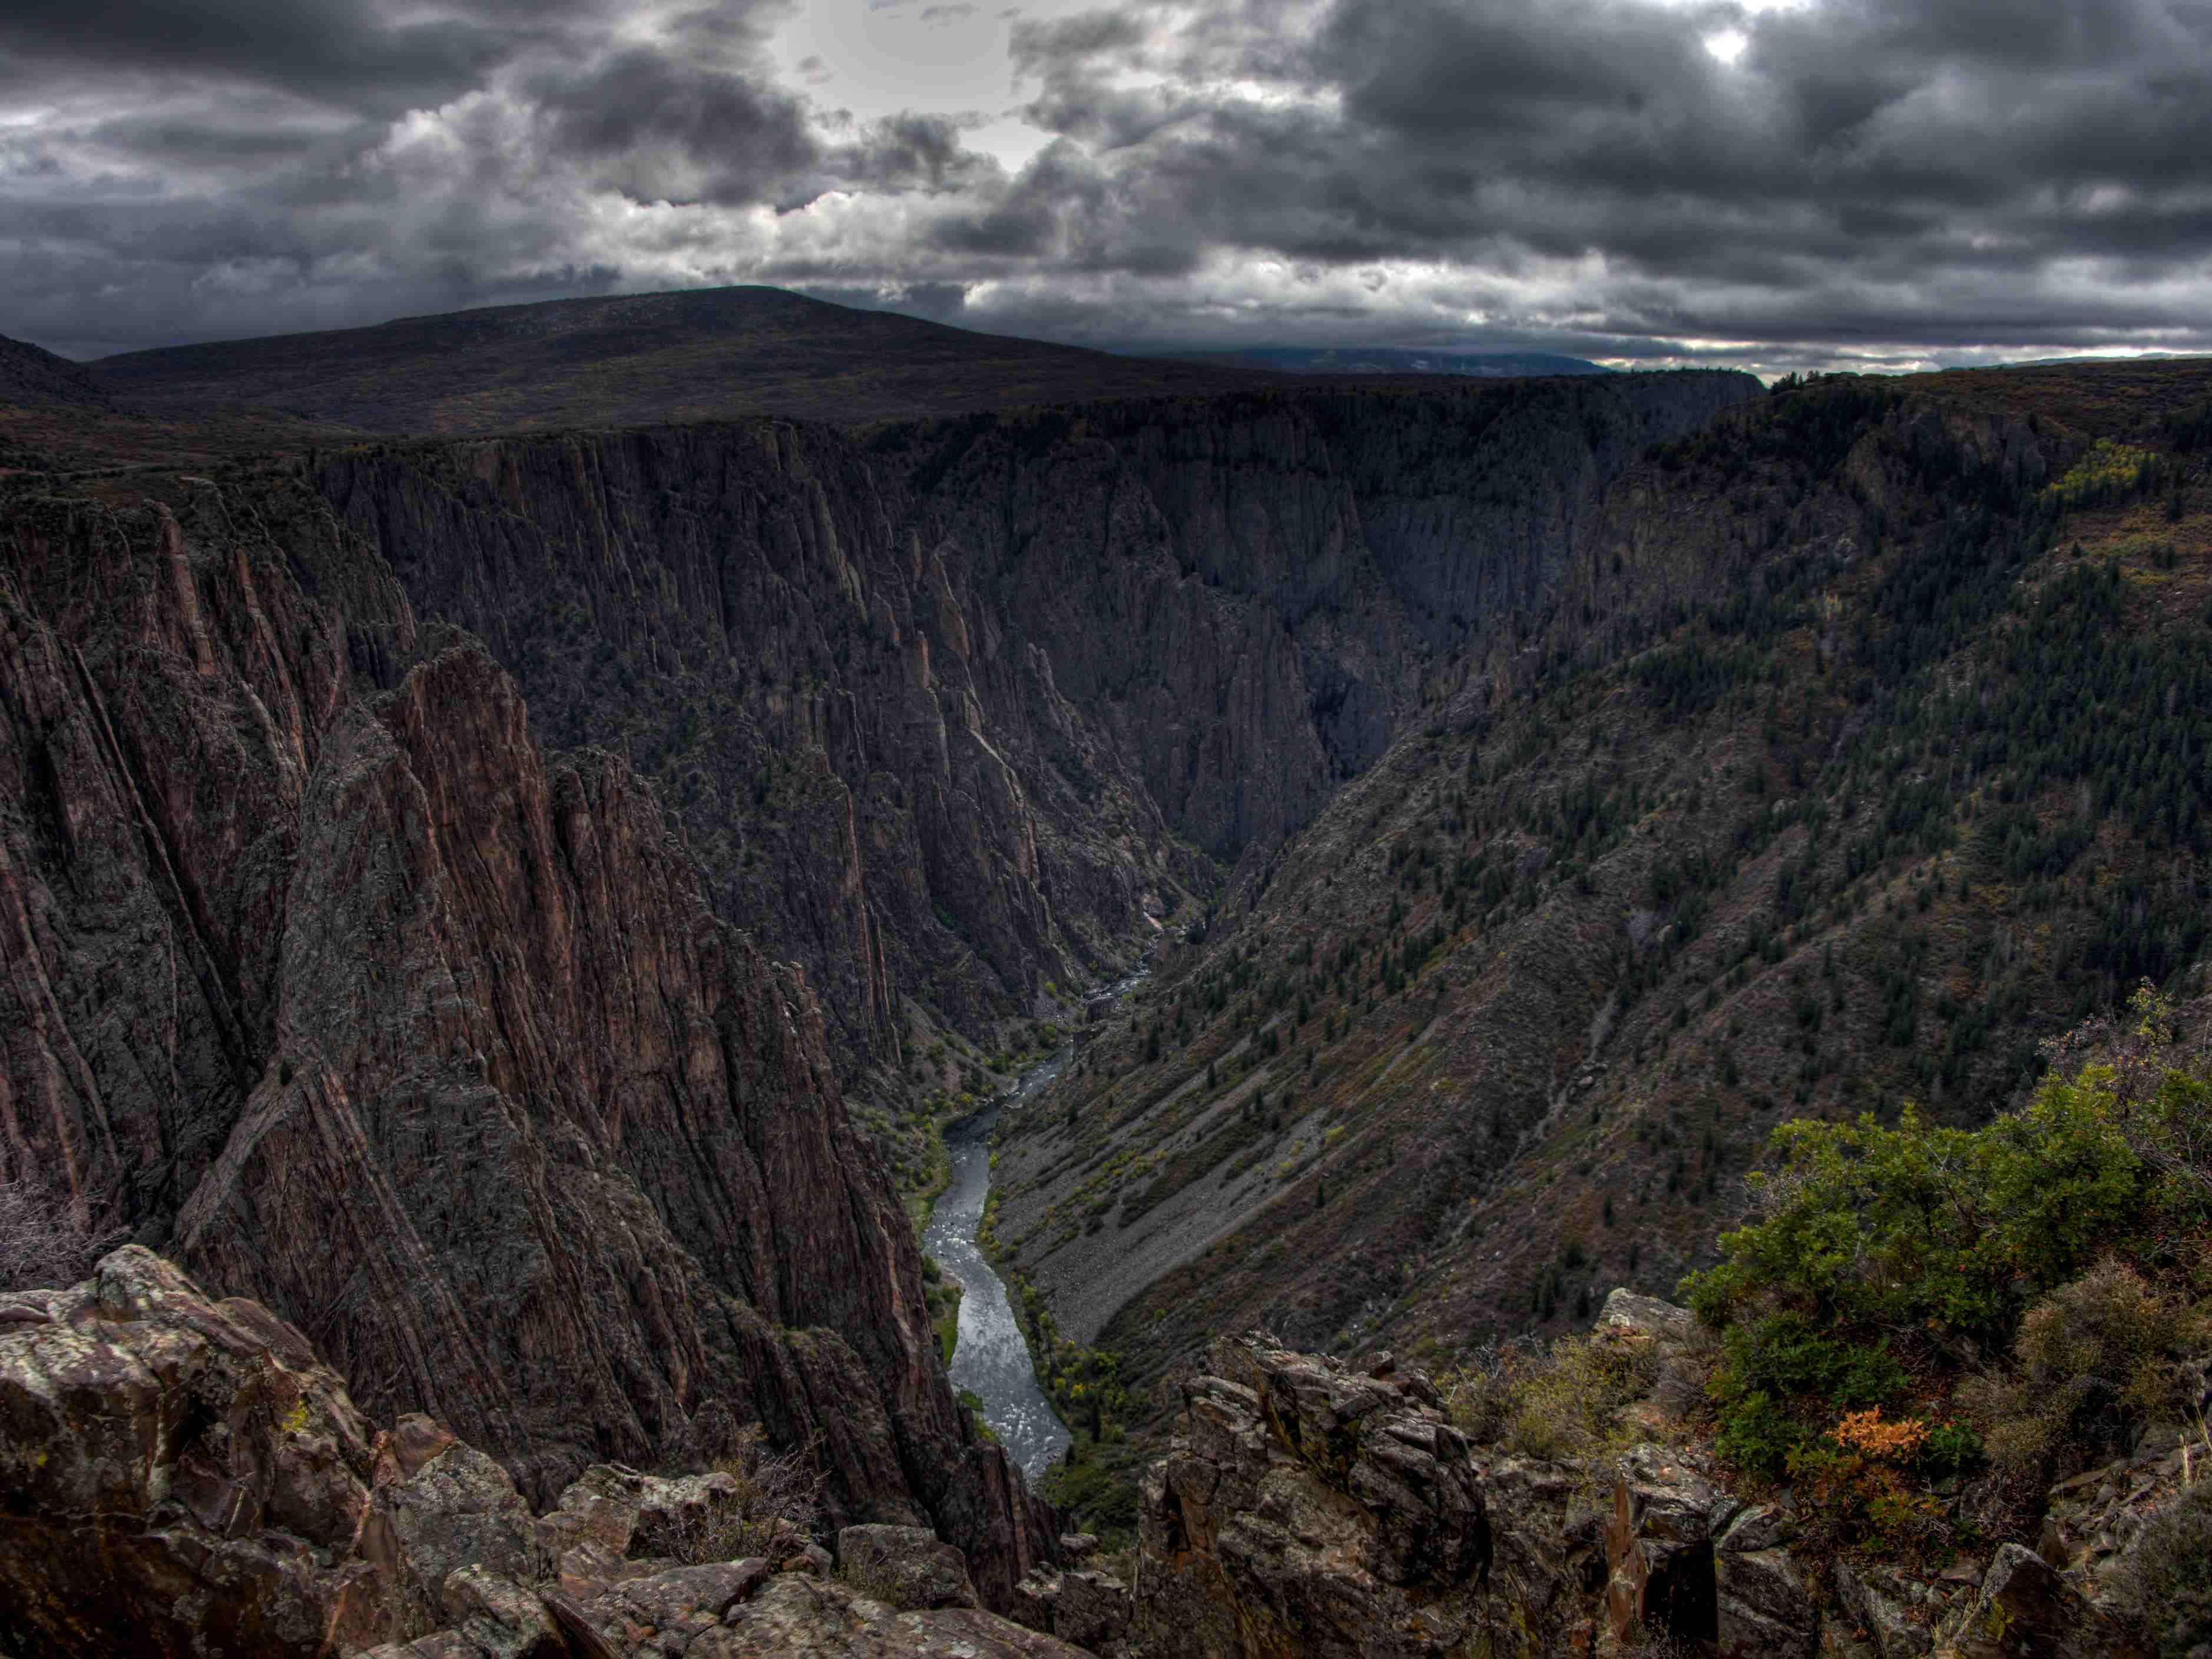 Explore the Black Canyon of the Gunnison National Park